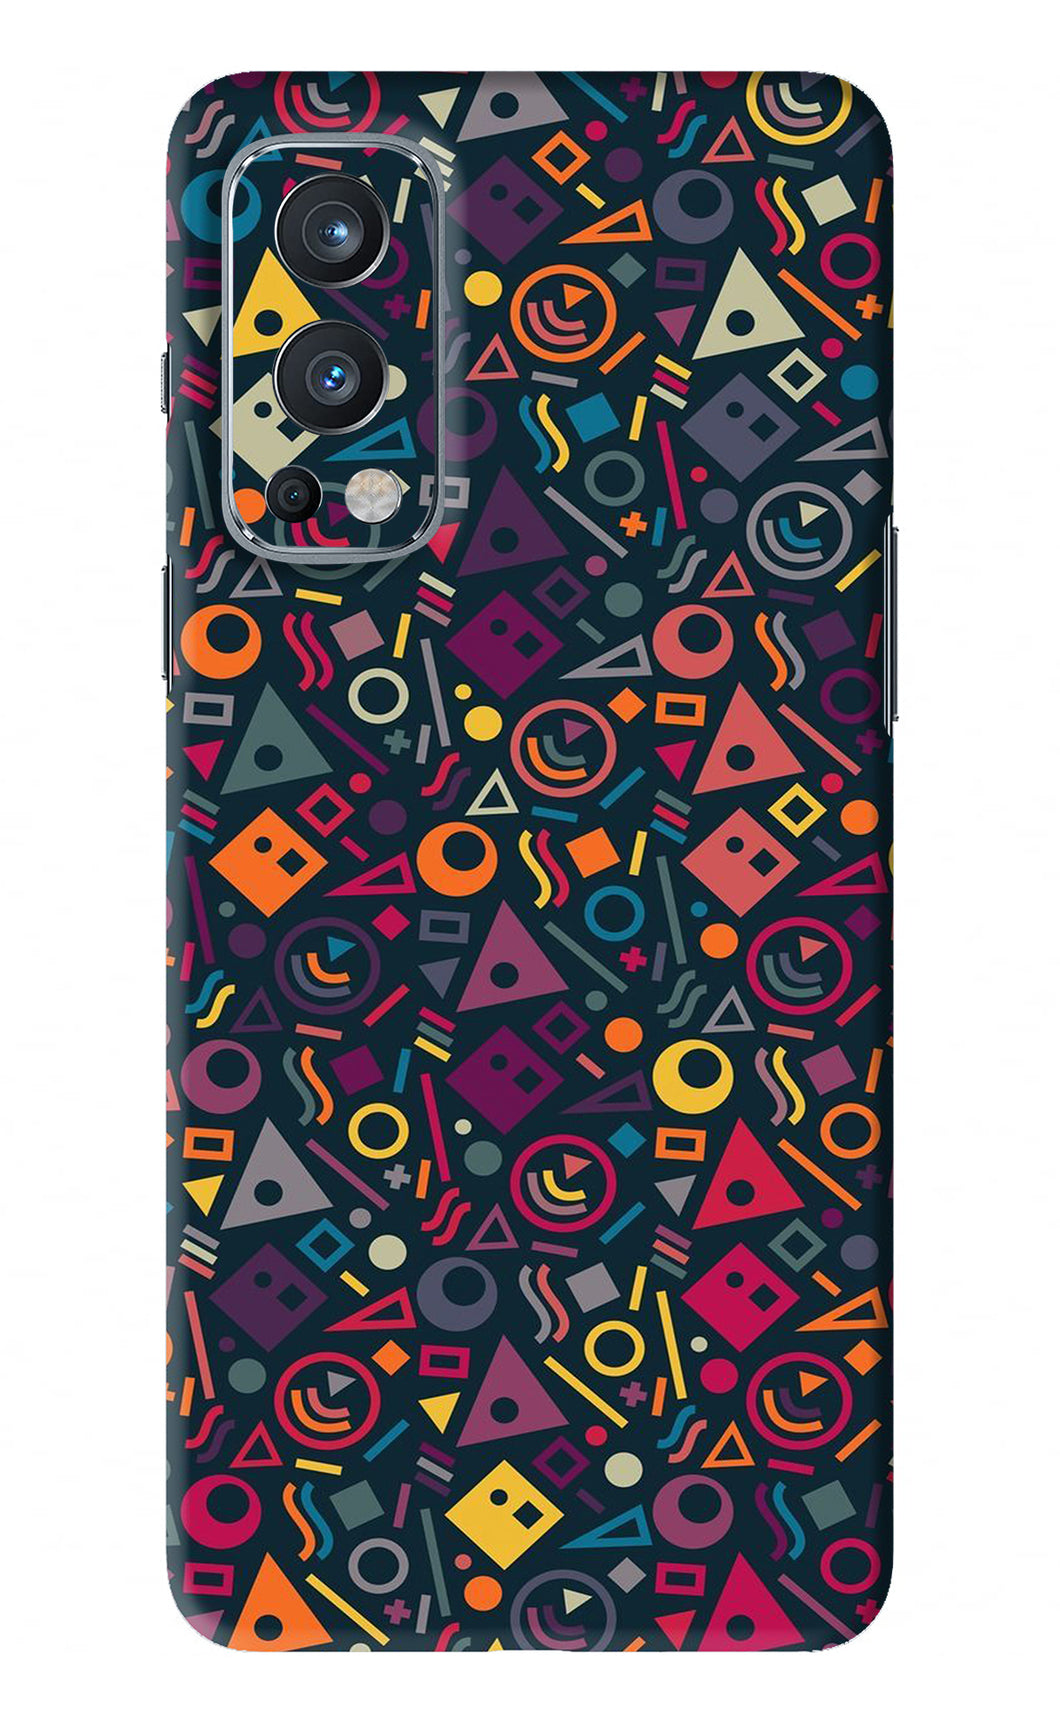 Geometric Abstract Oneplus Nord 2 Back Skin Wrap